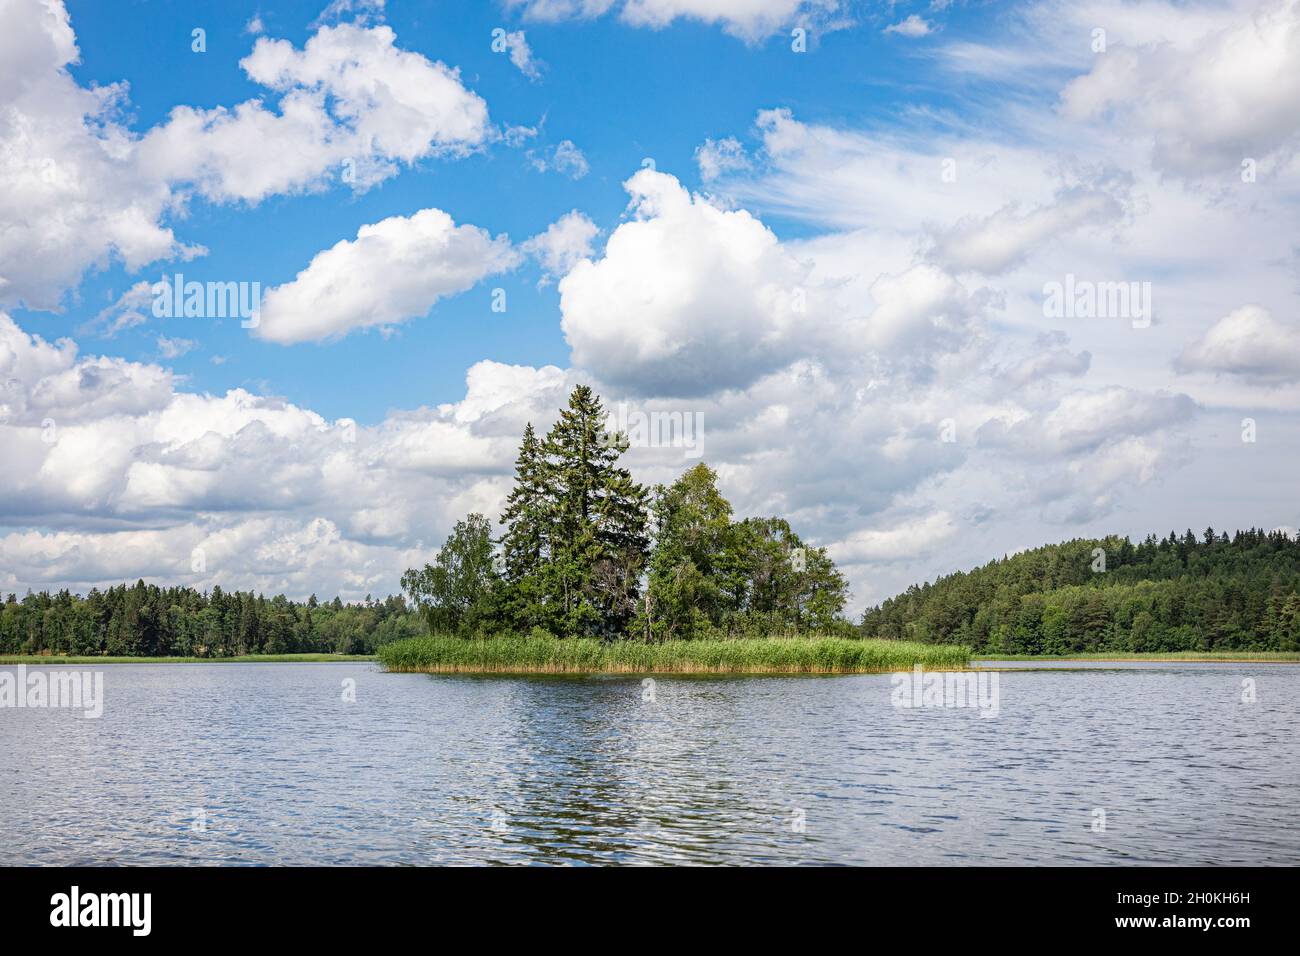 View of a scandinavian lake  with a blue sky with white fluffy clouds, green trees in the background and a small island in the centre. Stock Photo